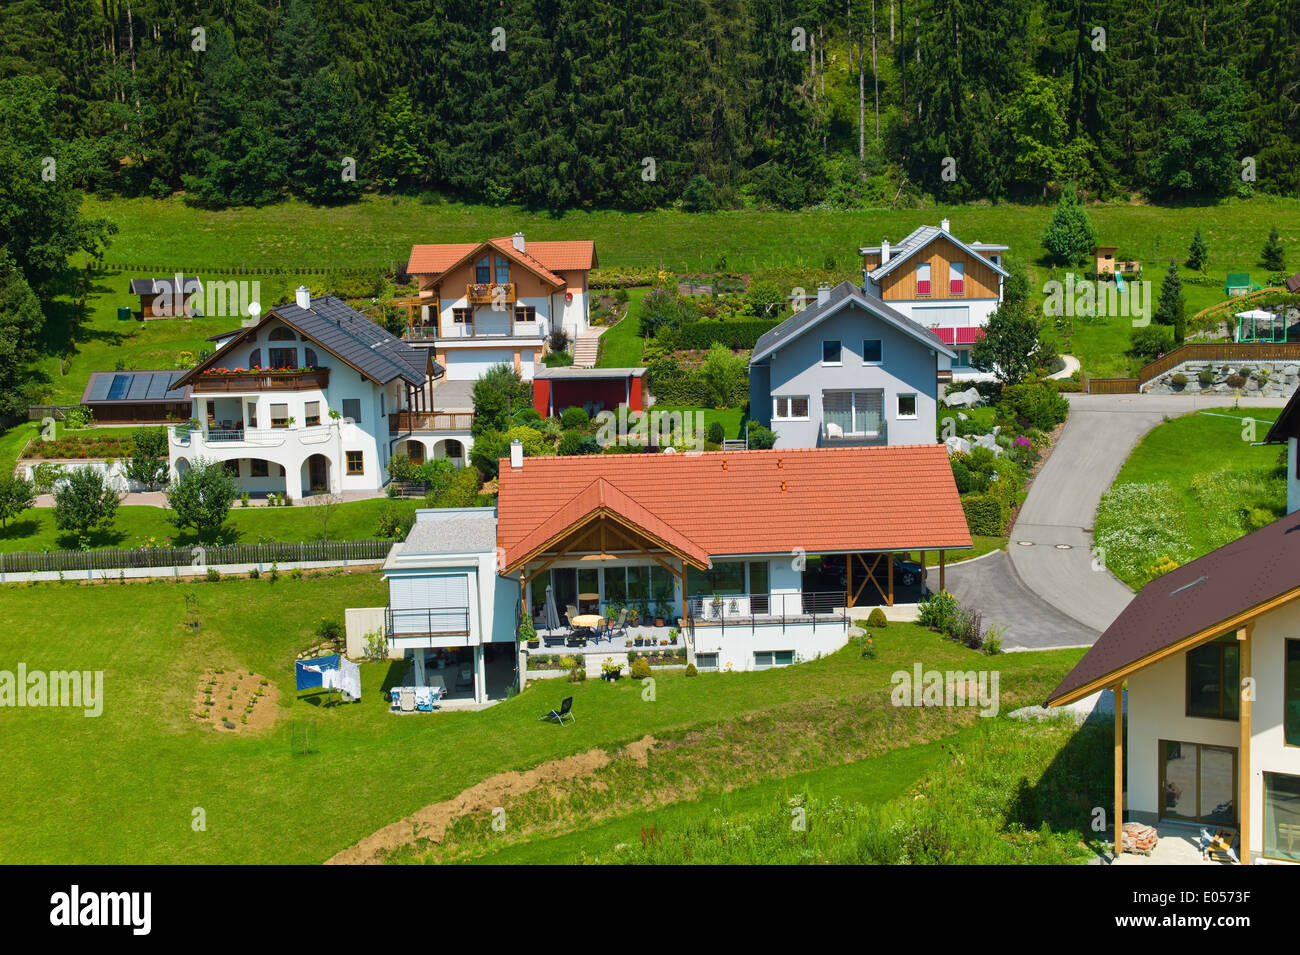 Several single-family dwellings in a settlement. Regional planning and own home, Mehrere Einfamilienhaeuser in einer Siedlung. R Stock Photo